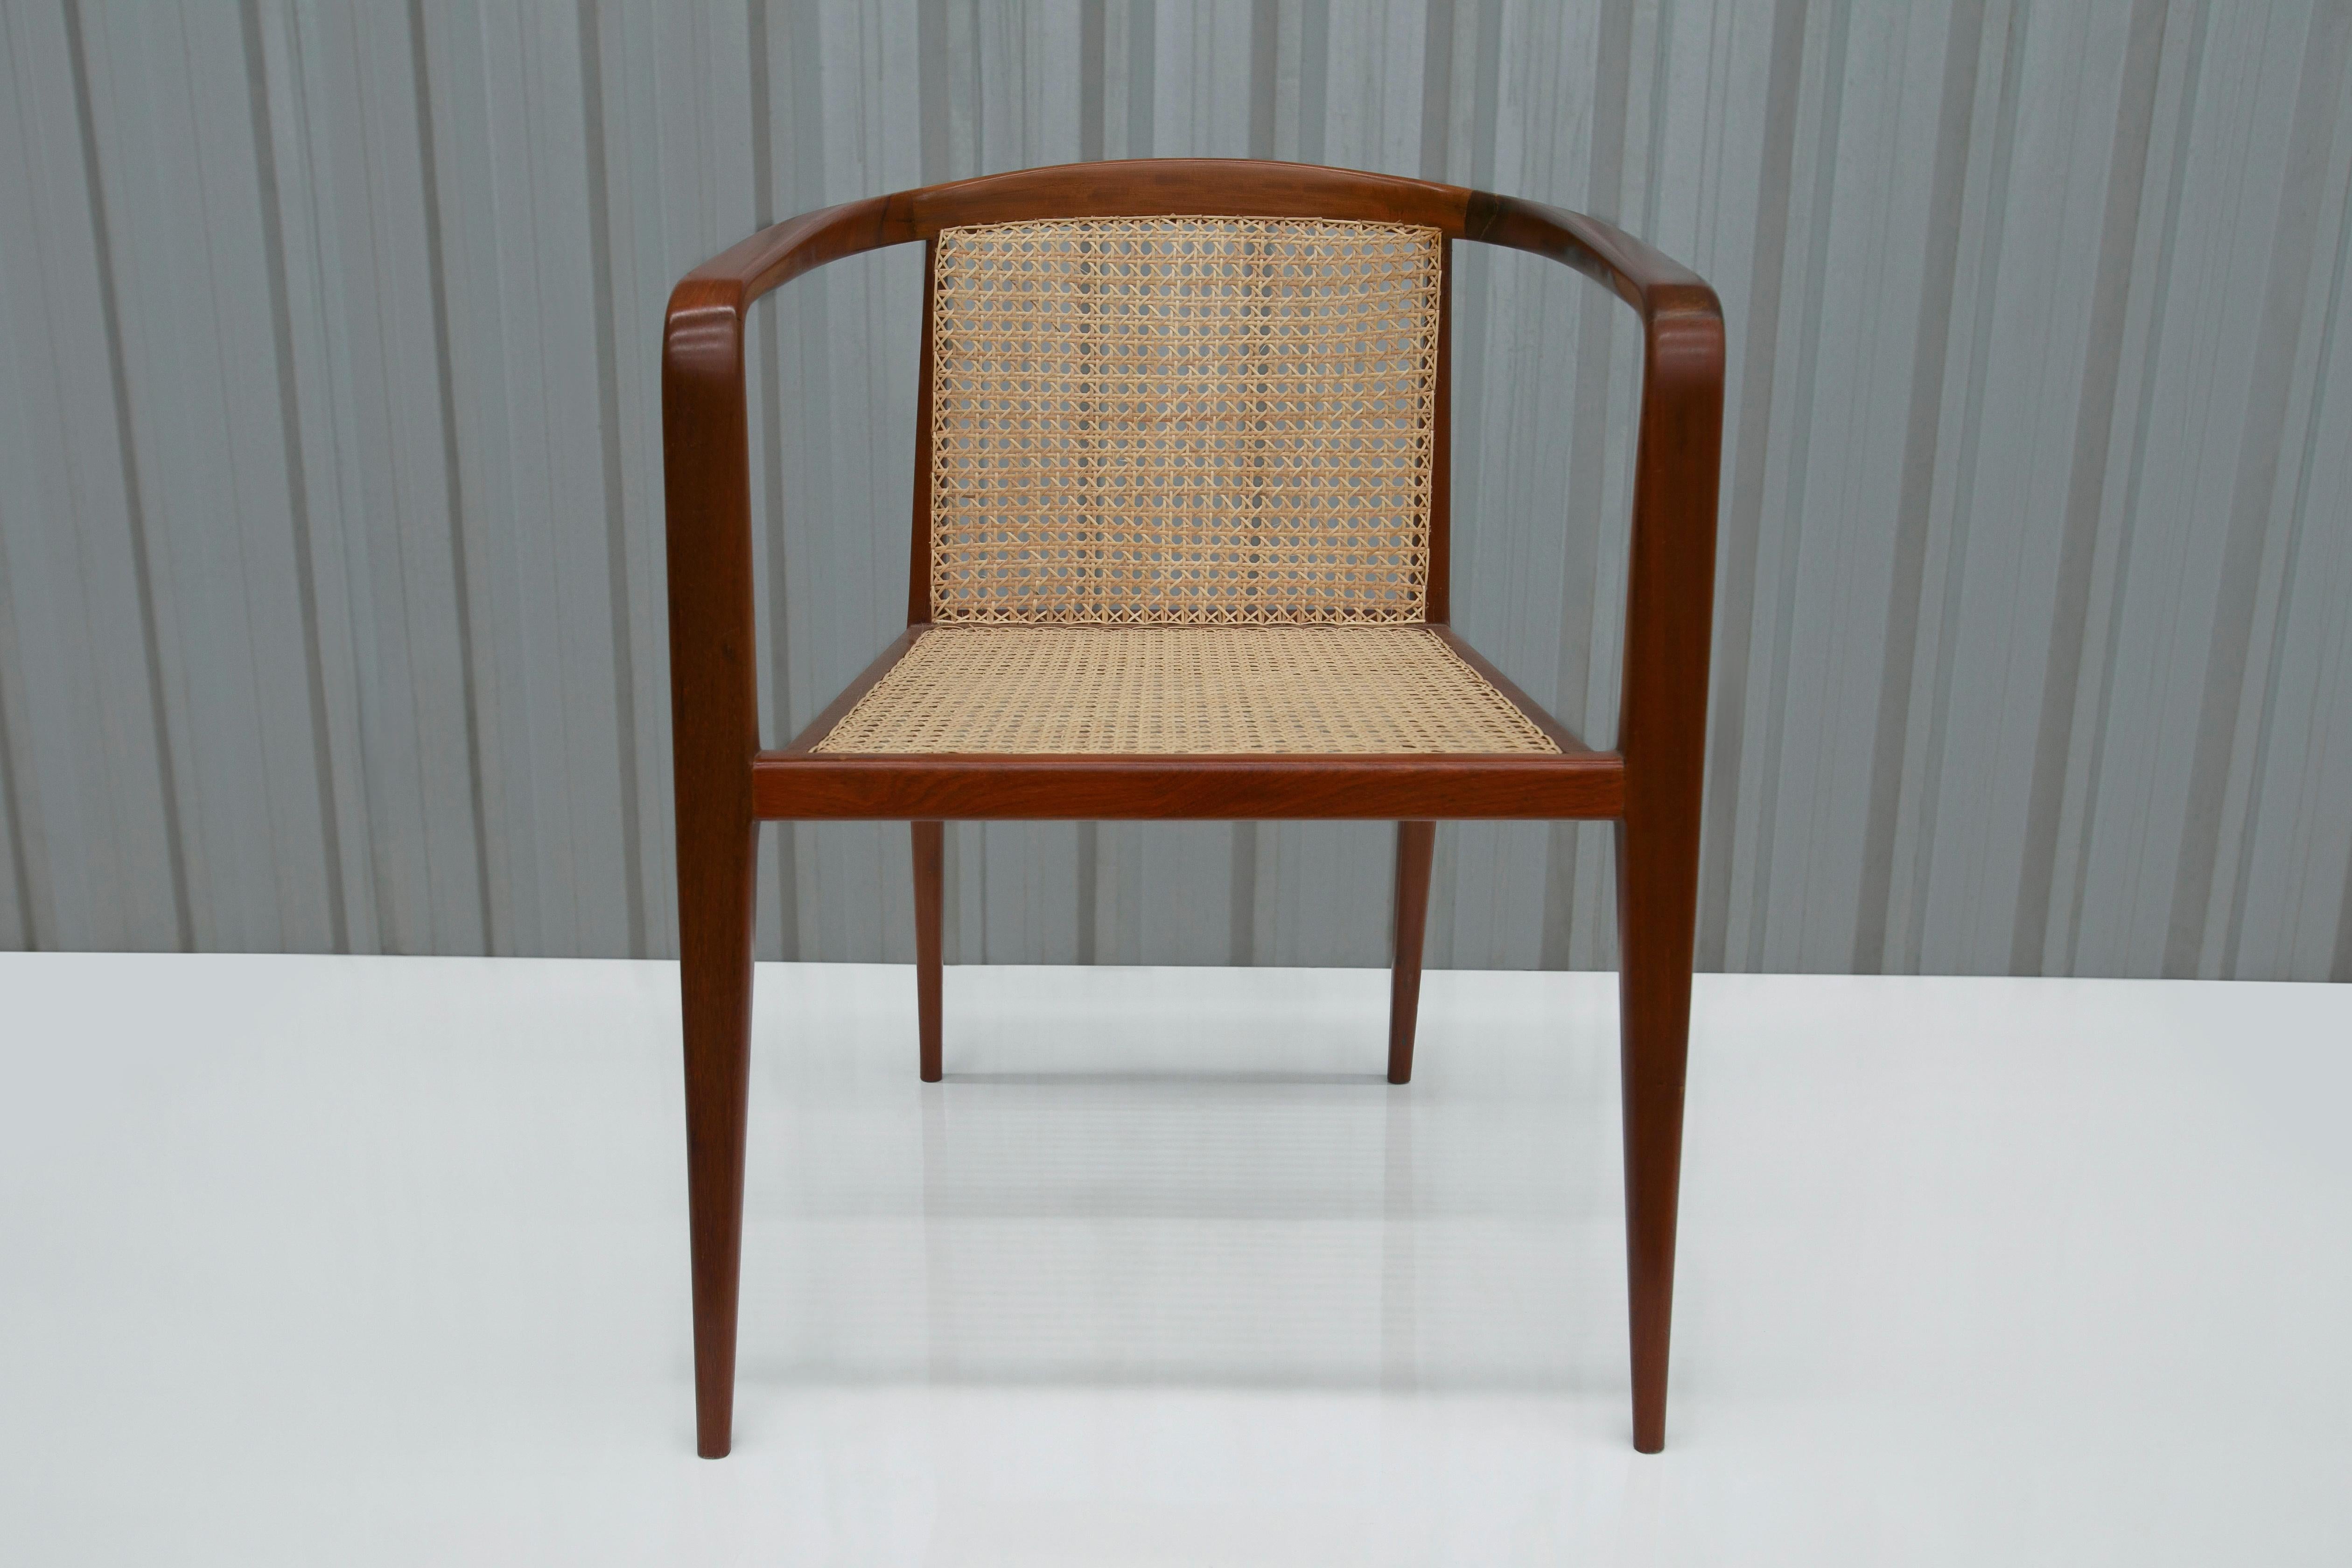 The chair is made of Brazilian rosewood (also known as jacaranda) and consists of four toothpick legs, a backrest in straw caning, and delicately curved armrests that connect to the backrest. Also, the wood on this piece has been refinished and